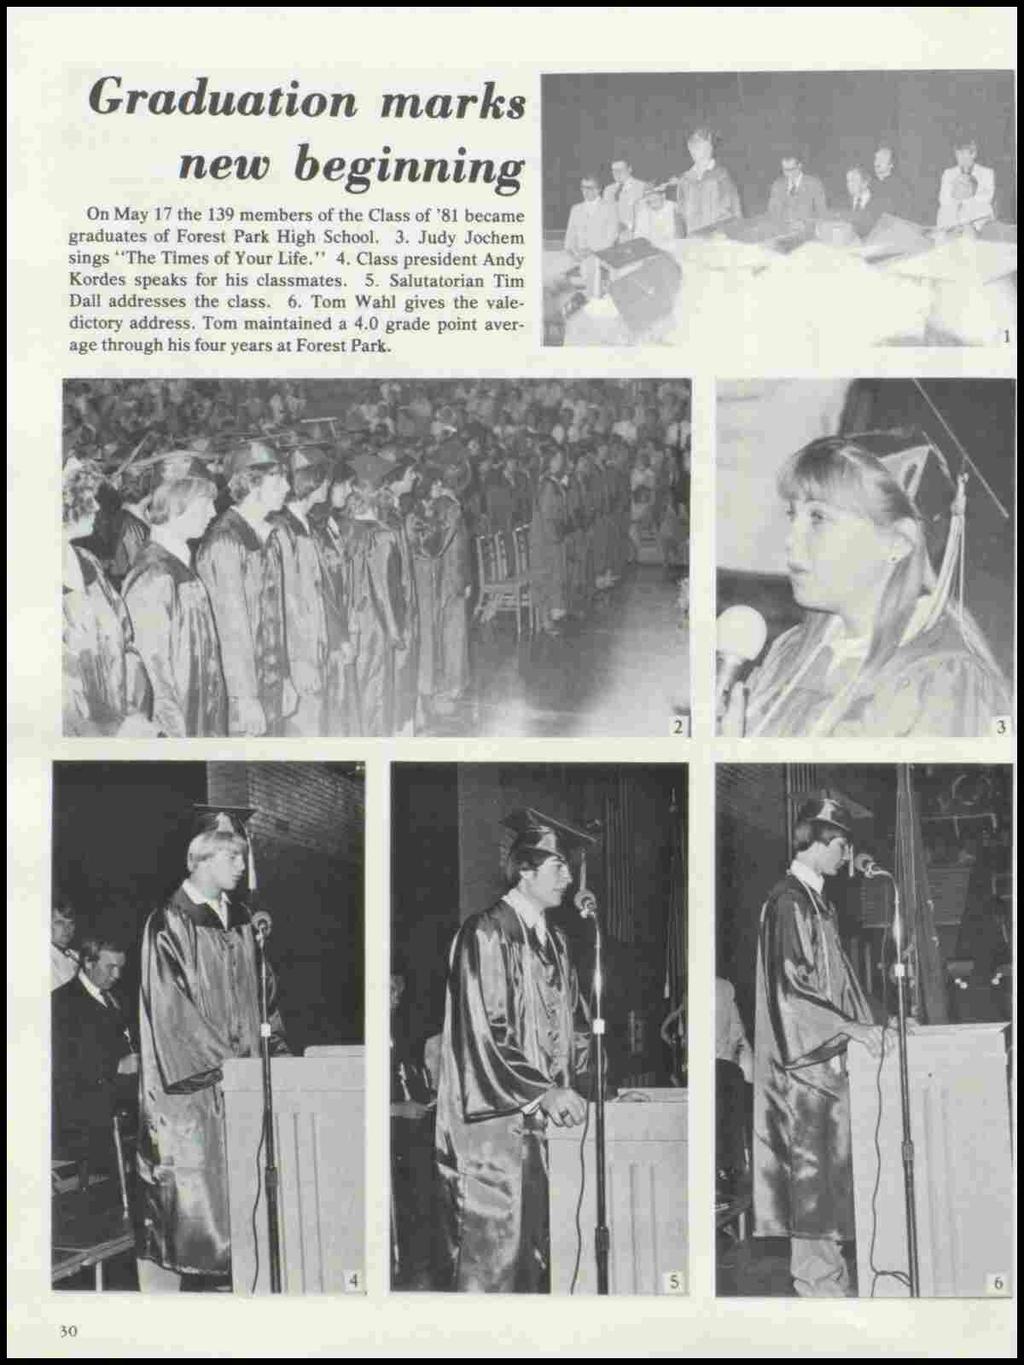 Graduation marks new beginning On May 17 the 139 members of the Class of '81 became graduates of Forest Park High School. 3. Judy Jochem sings "The Times of Your Life." 4.